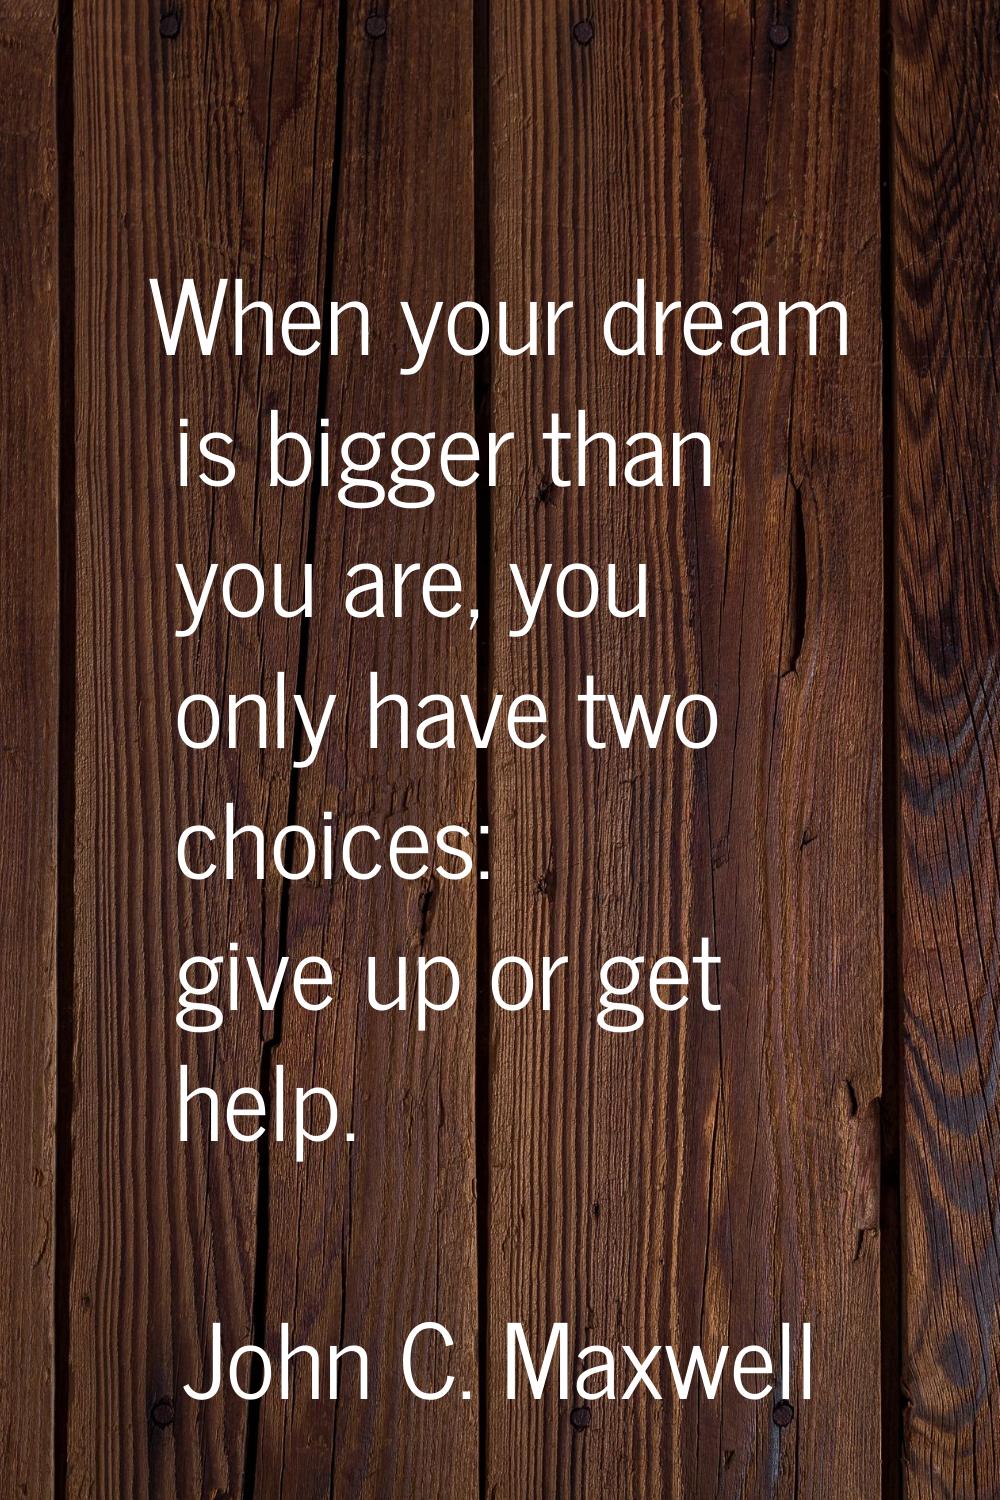 When your dream is bigger than you are, you only have two choices: give up or get help.